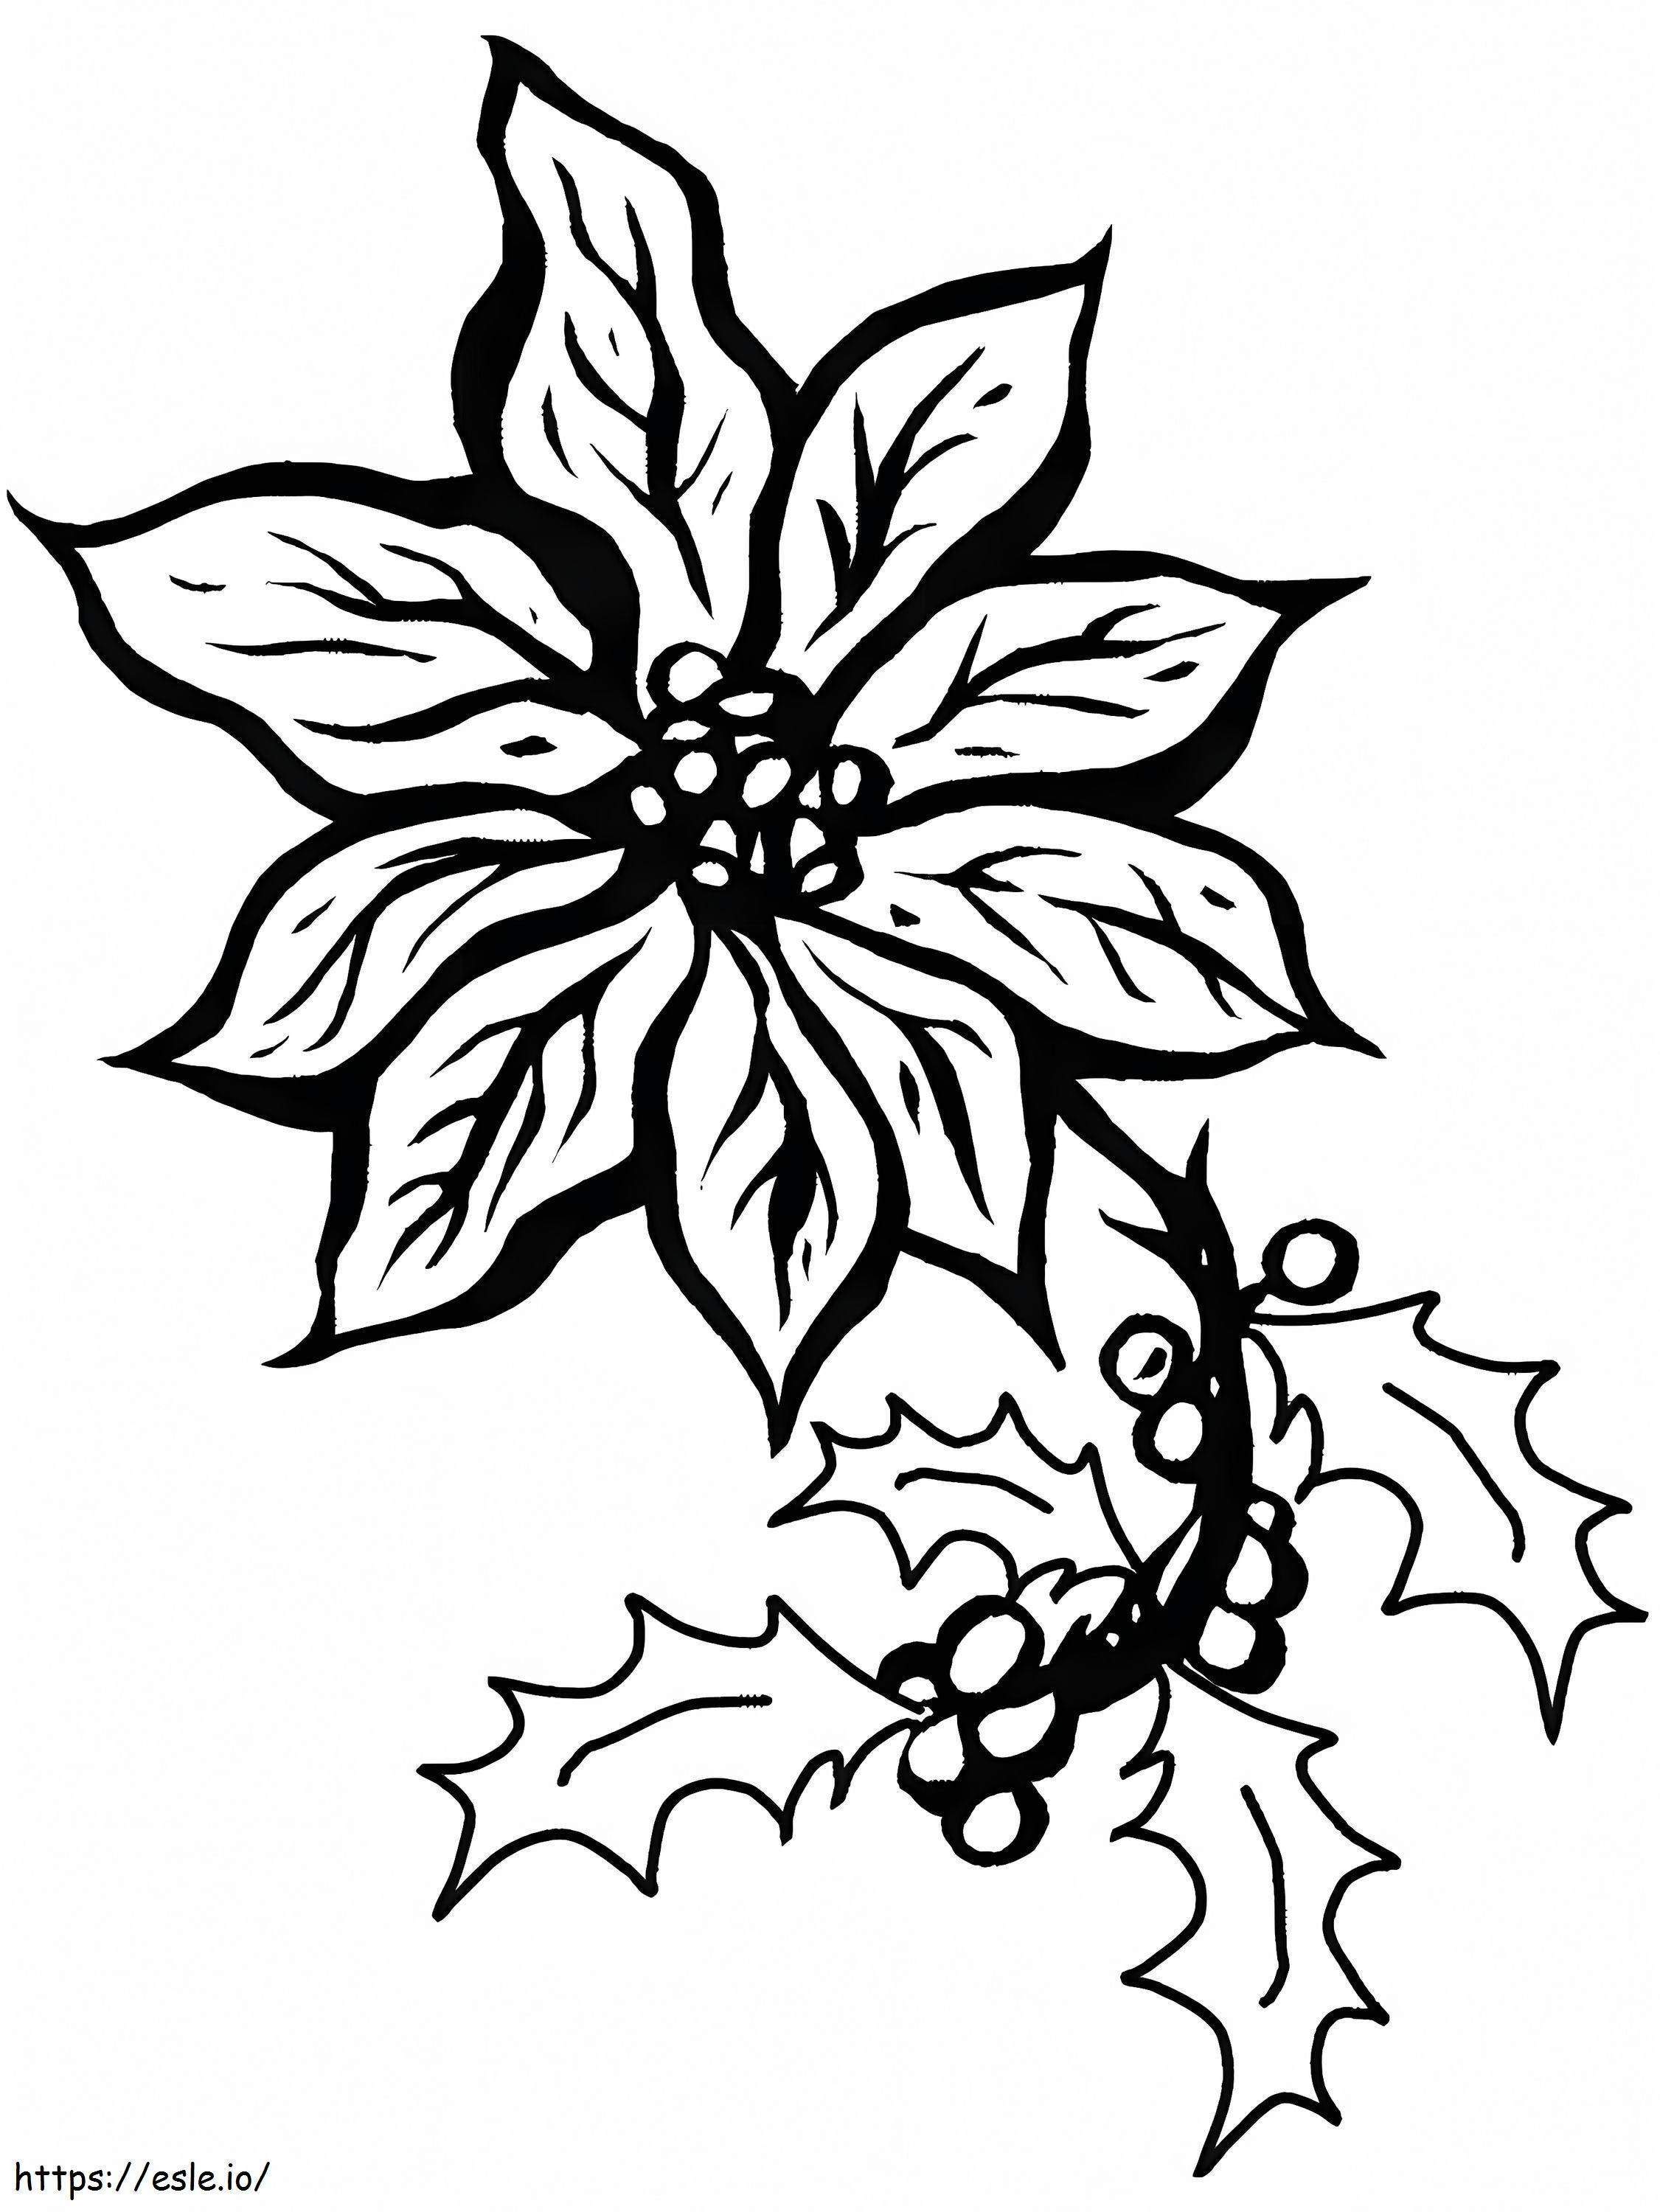 Poinsettia5A4 coloring page